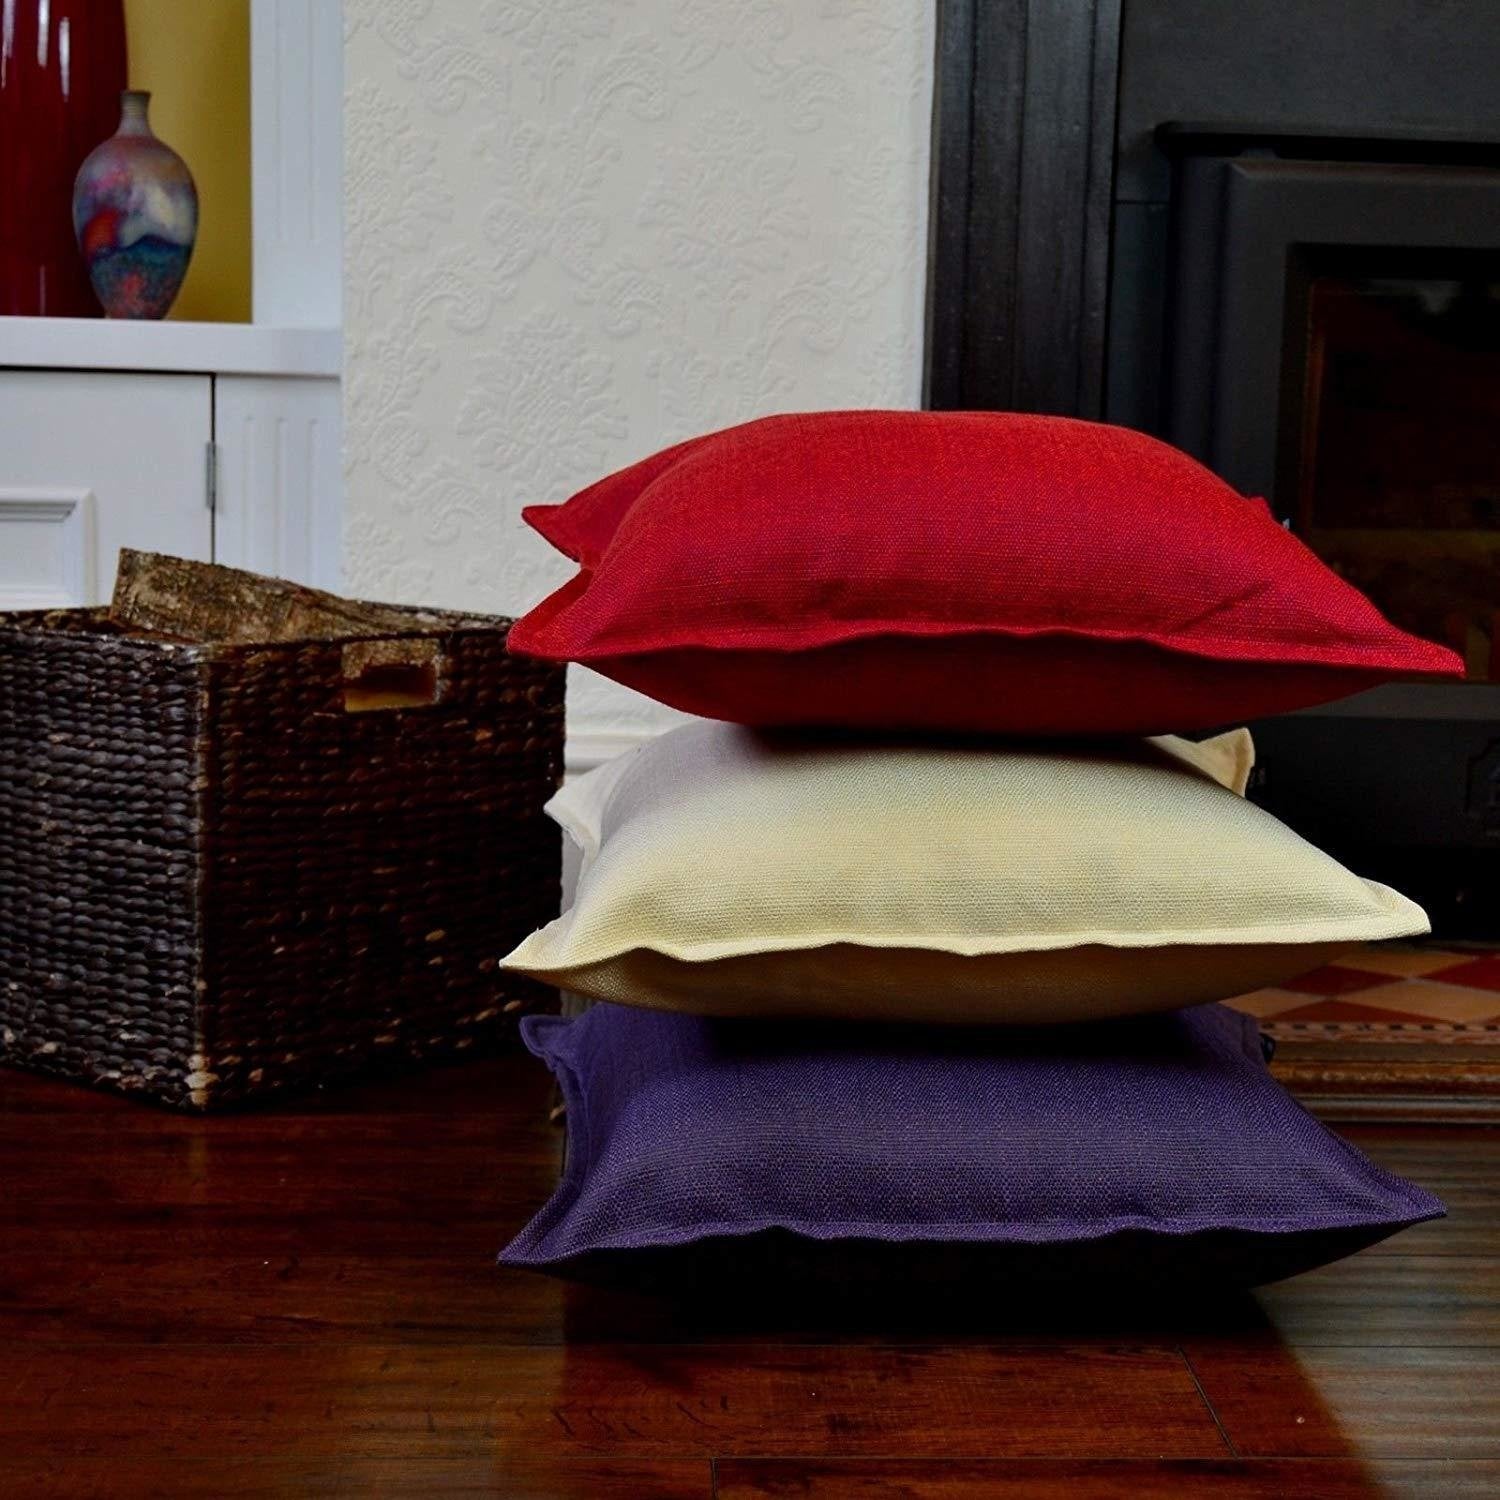 McAlister Textiles Savannah Wine Red Cushion Cushions and Covers 